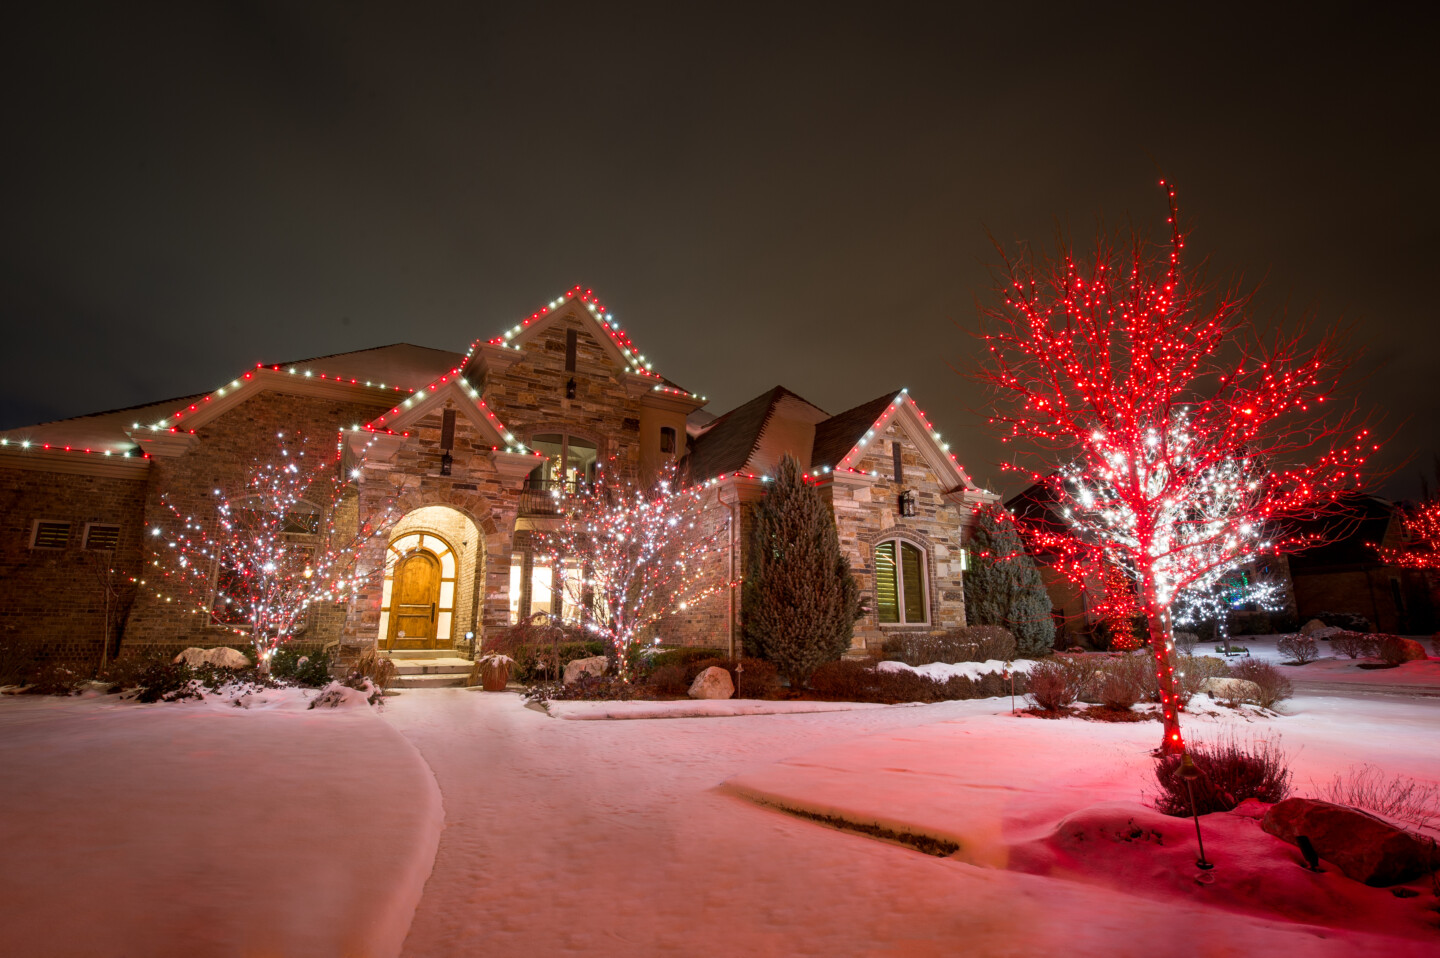 House with professional holiday lights in red and white